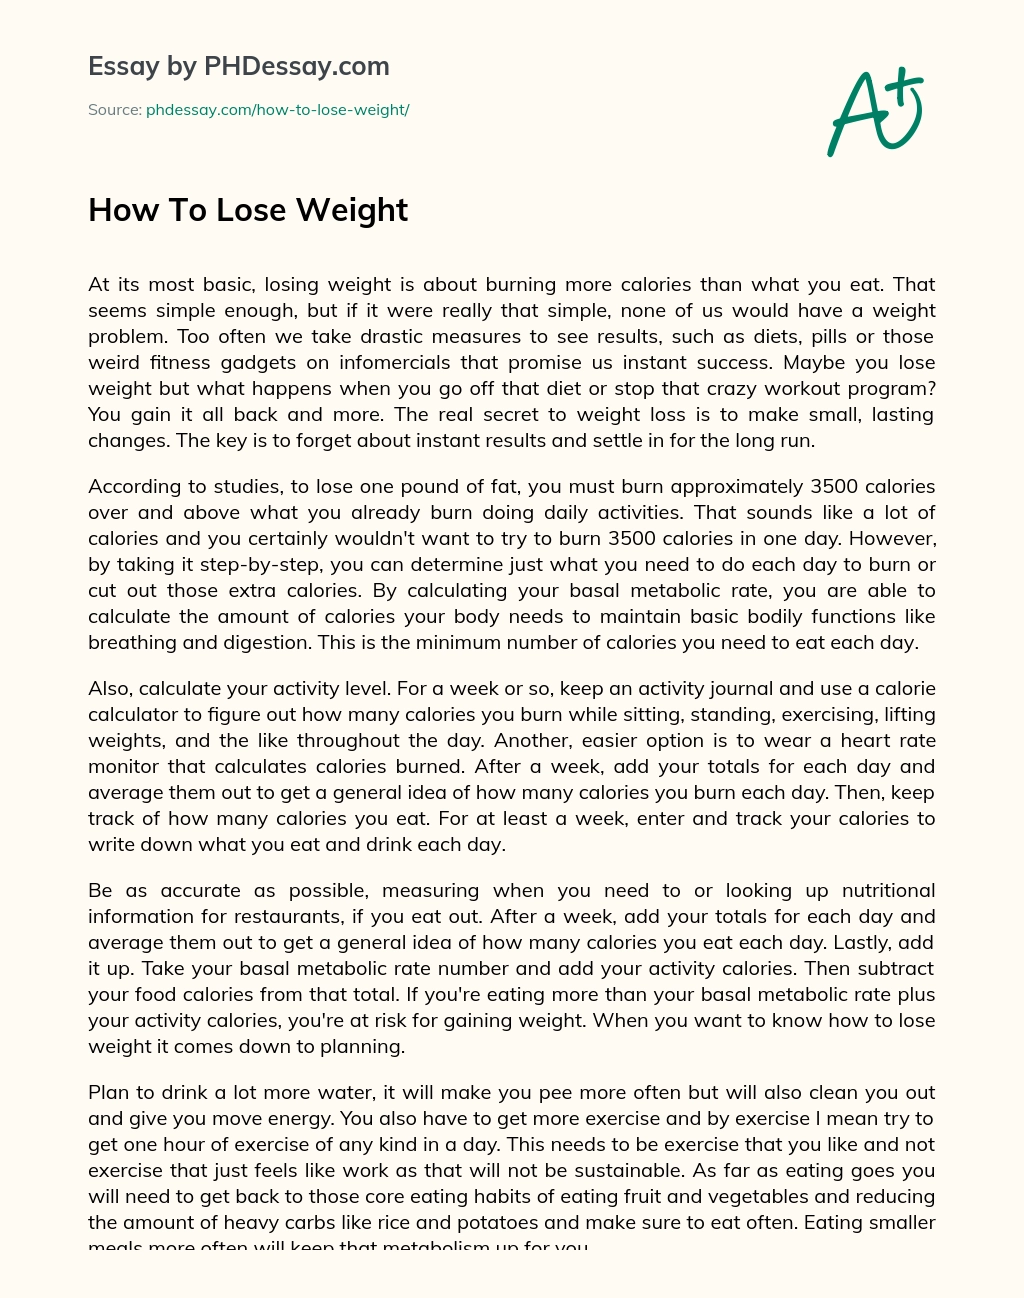 Реферат: How To Lose Weight Essay Research Paper